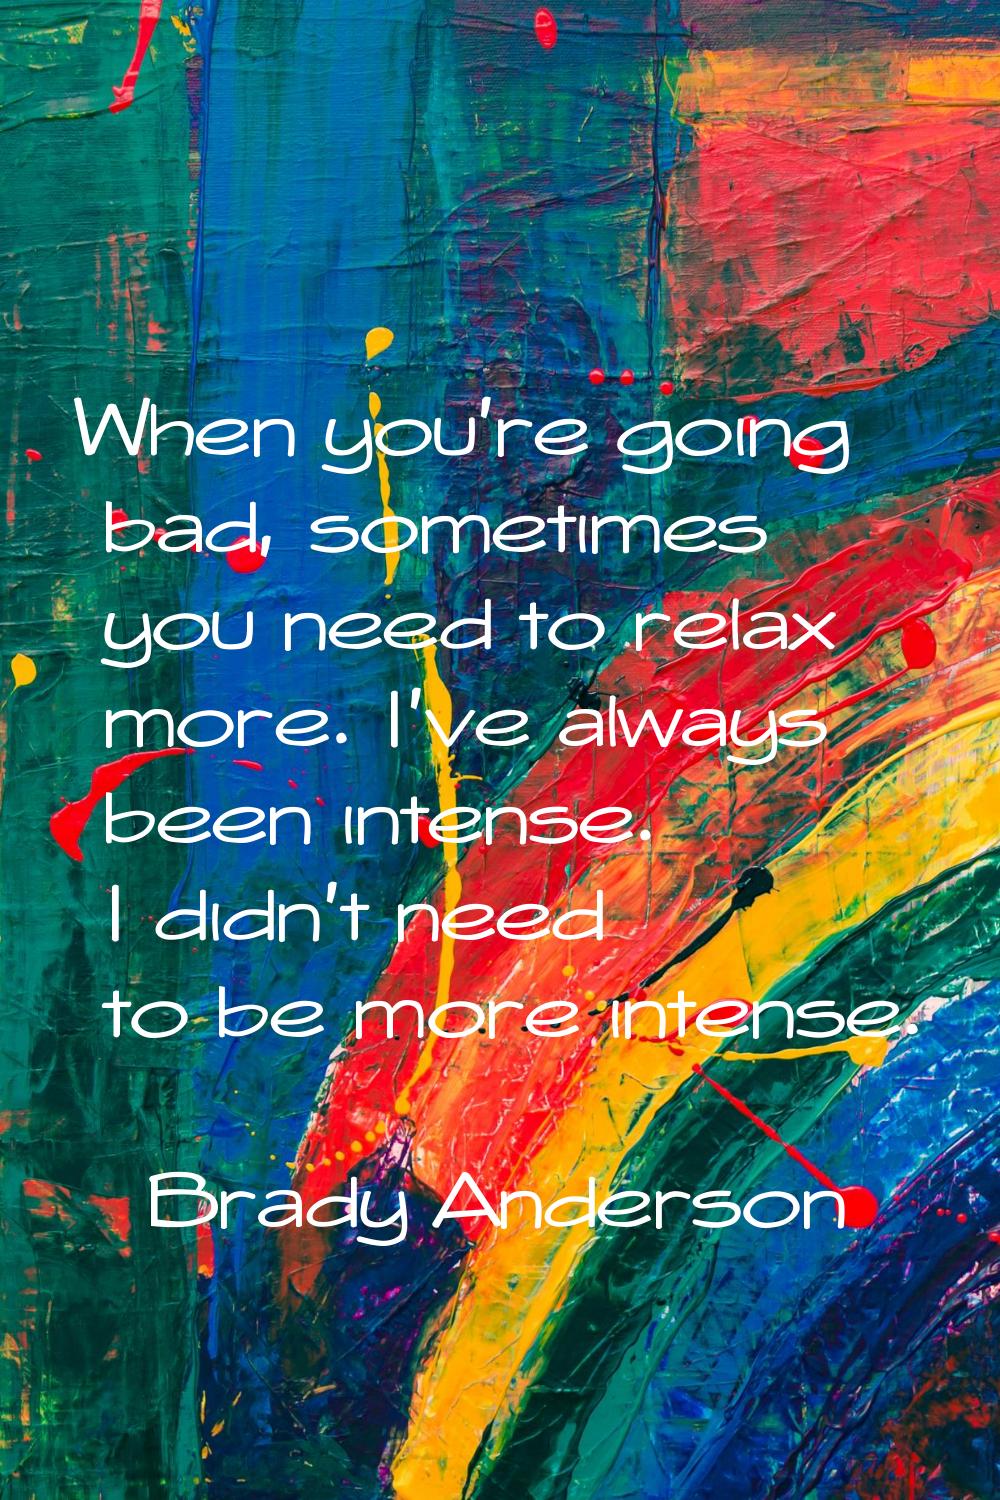 When you're going bad, sometimes you need to relax more. I've always been intense. I didn't need to